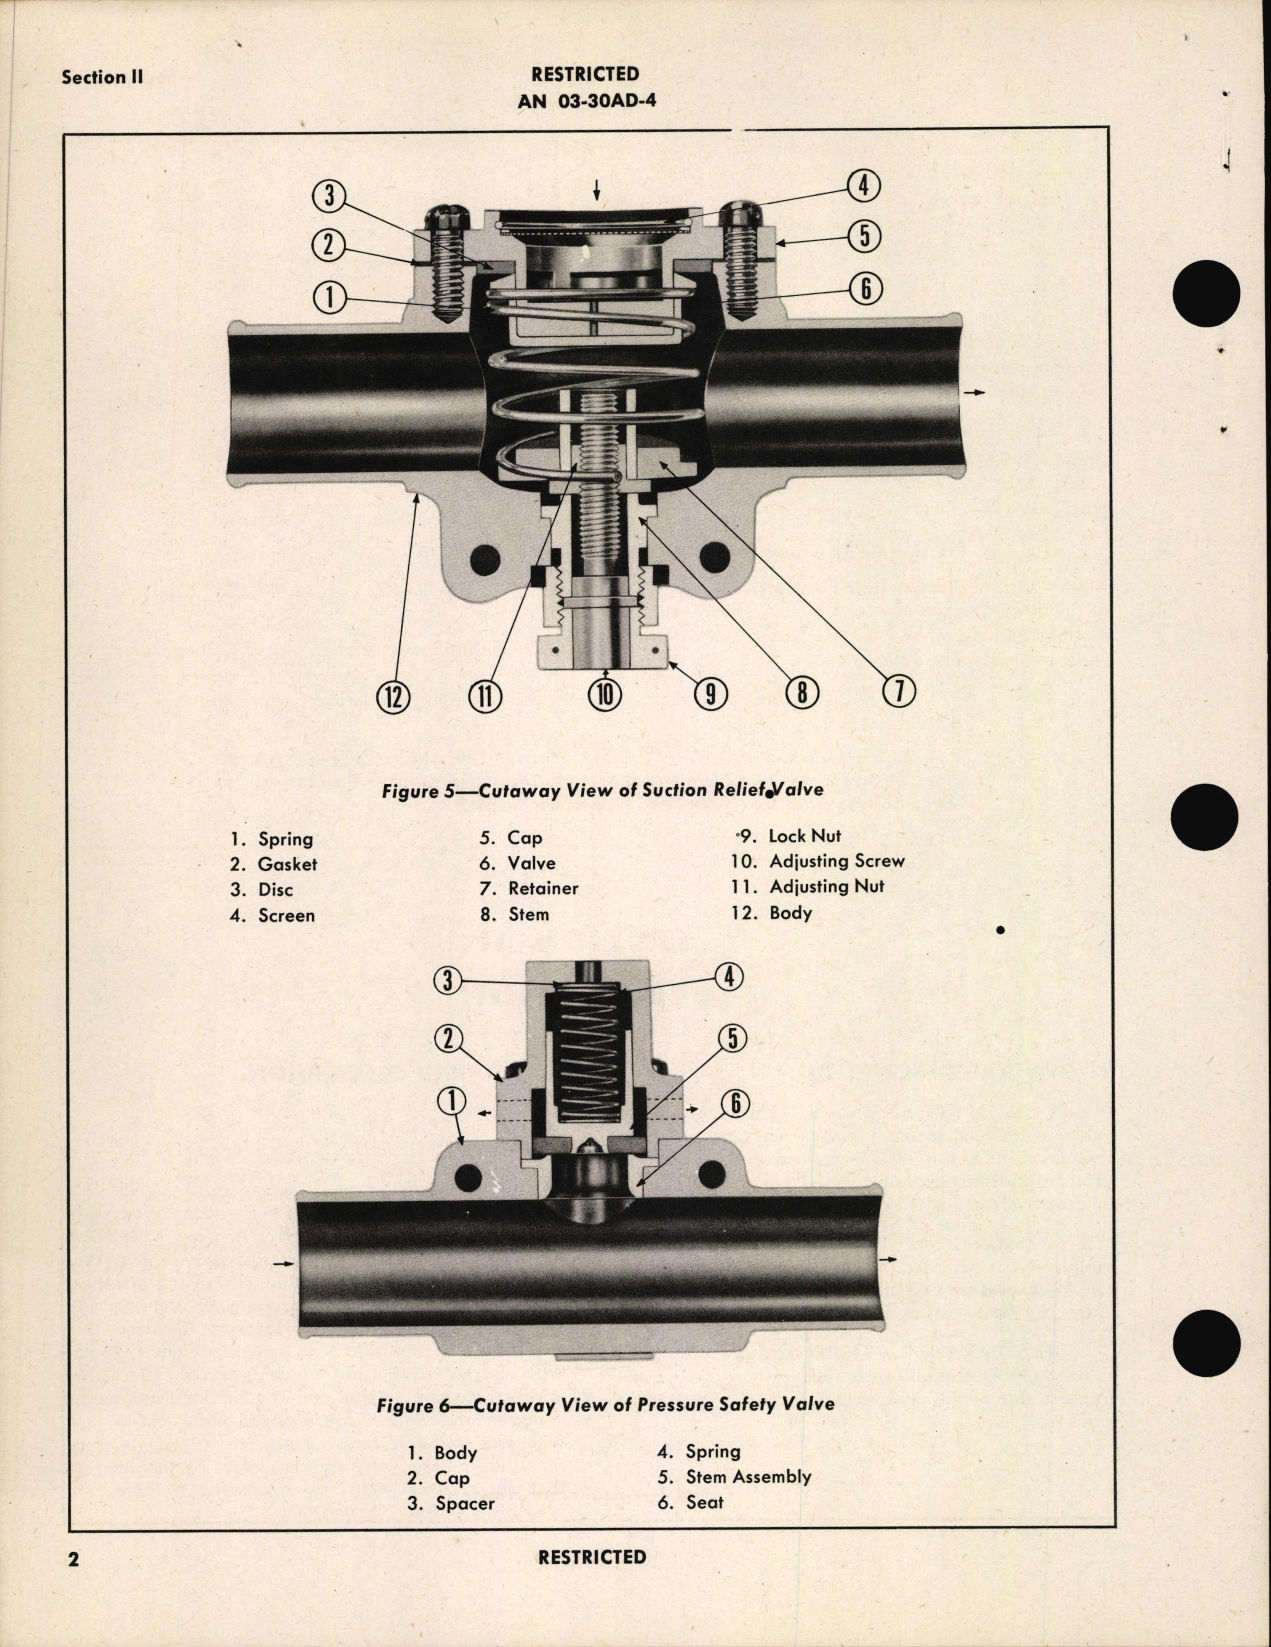 Sample page 6 from AirCorps Library document: Handbook of Instructions with Parts Catalog for Relief Valves, Safety Valve, and Oil Separator